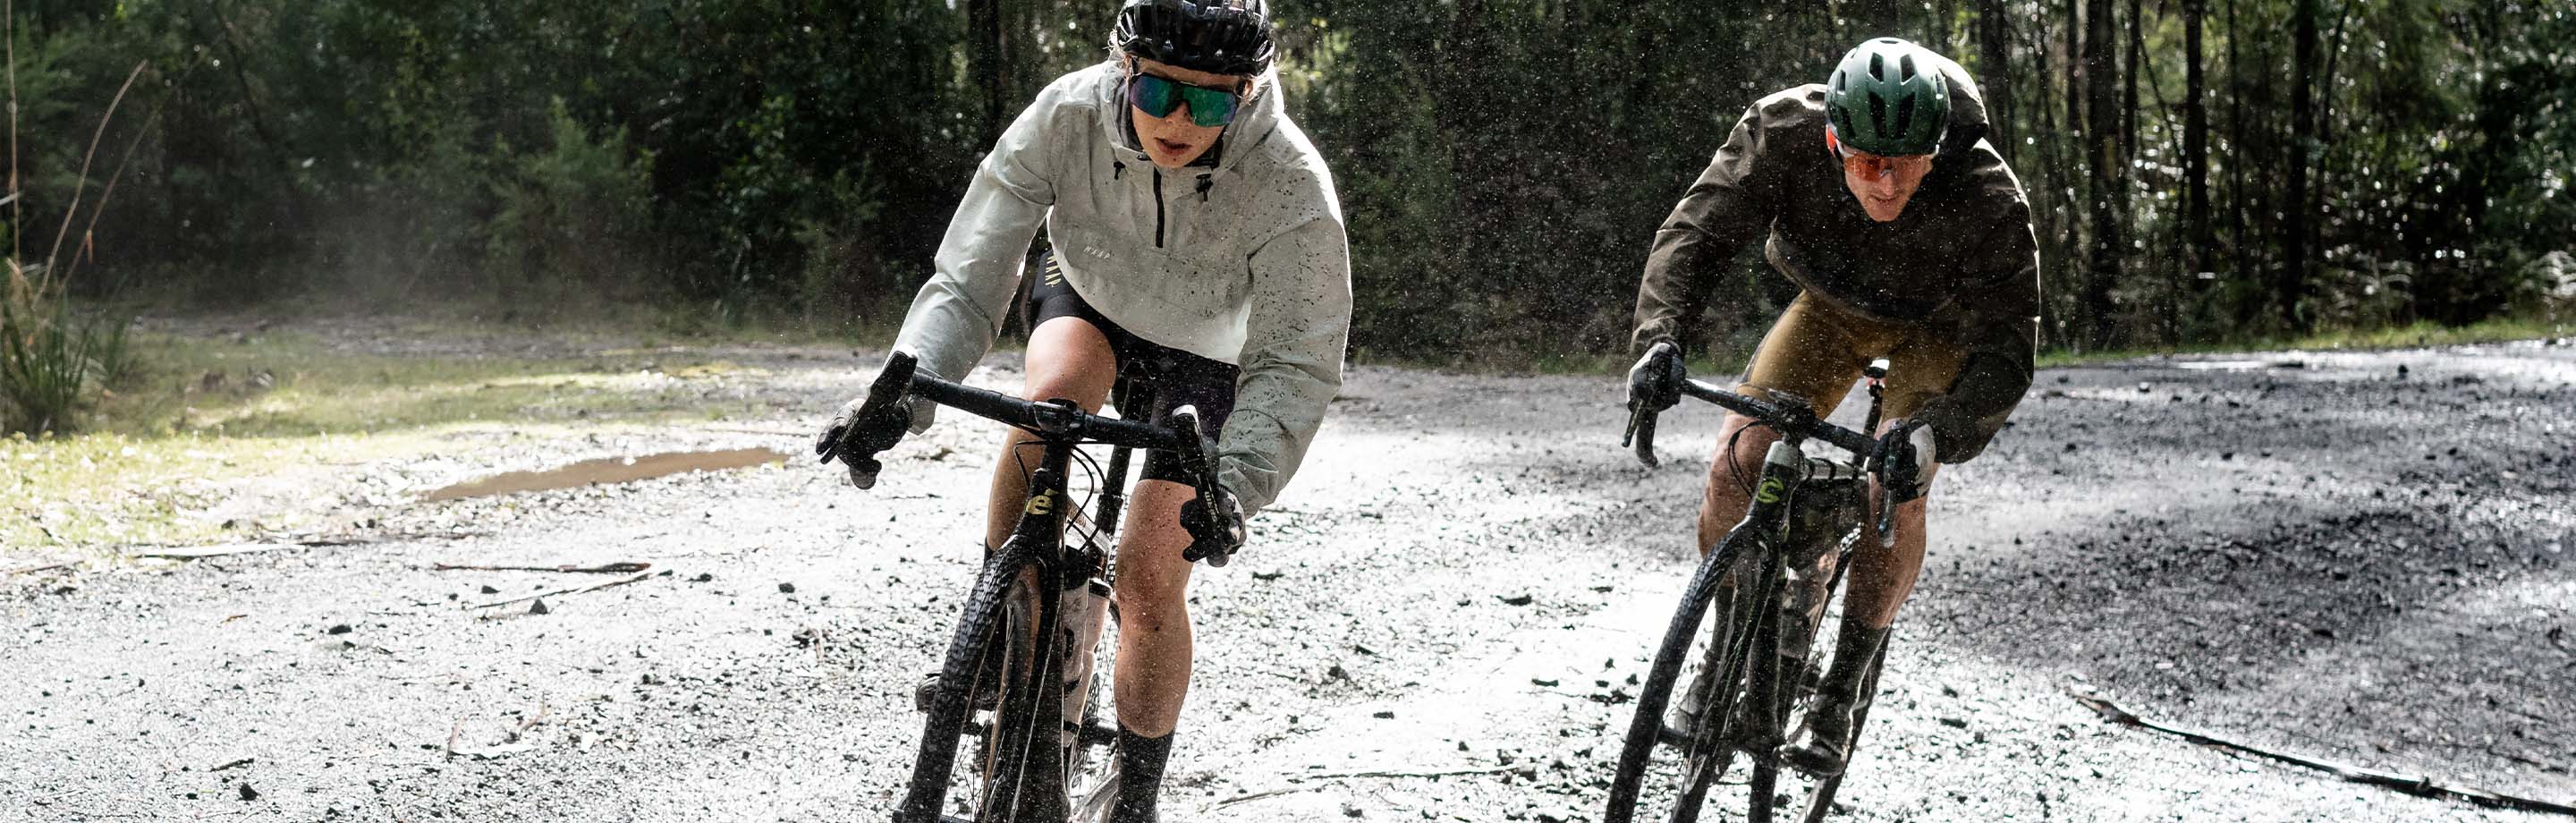 MAAP - High Quality Bike Wear with Style